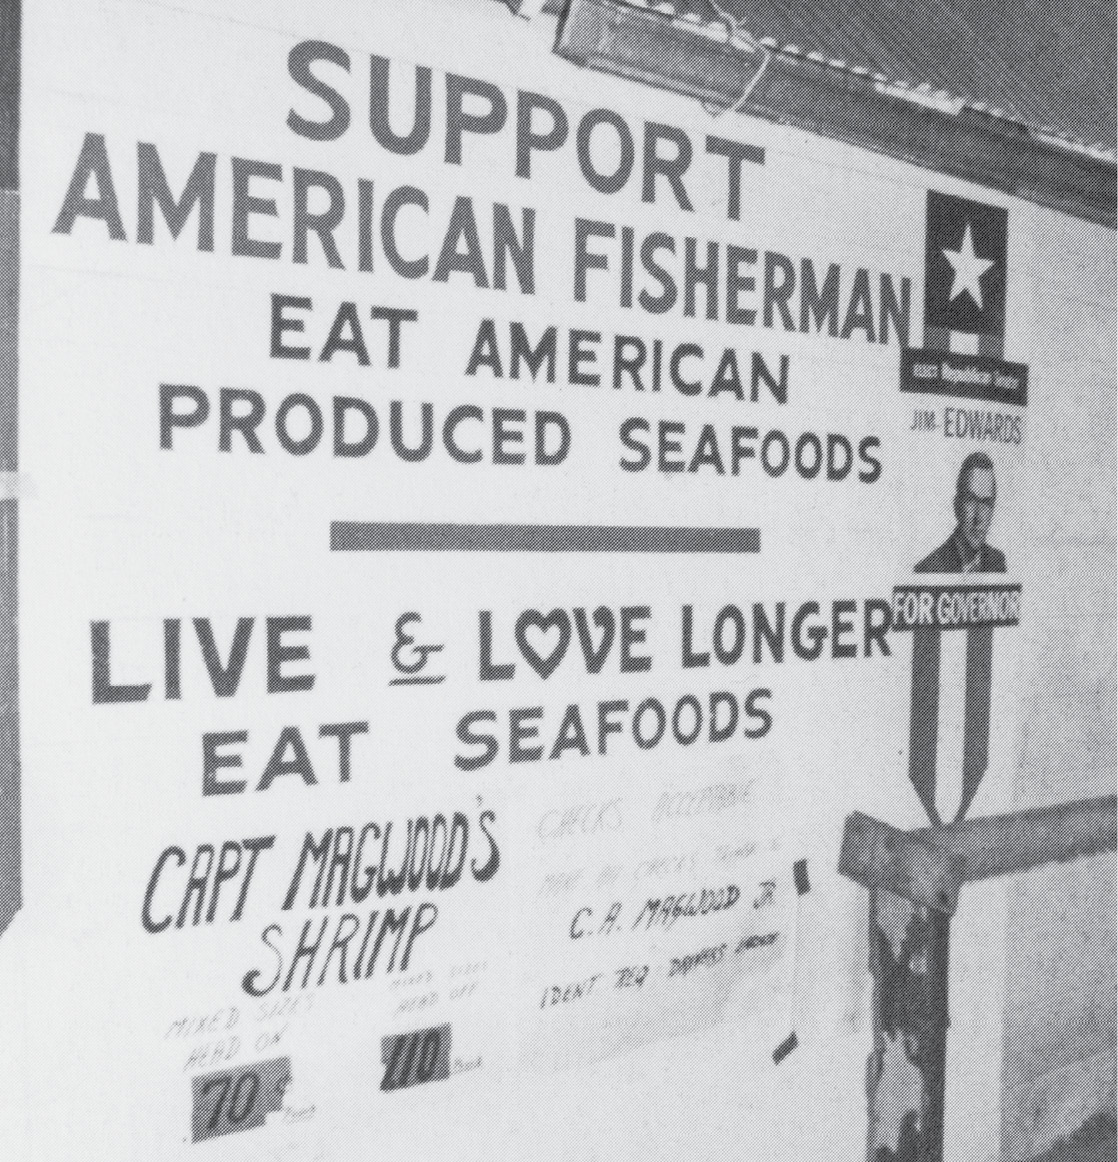 The Magwoods have touted the “buy local” slogan for decades, as evidenced by the sign at C A Magwood Jr &amp; Sons seafood and dock.